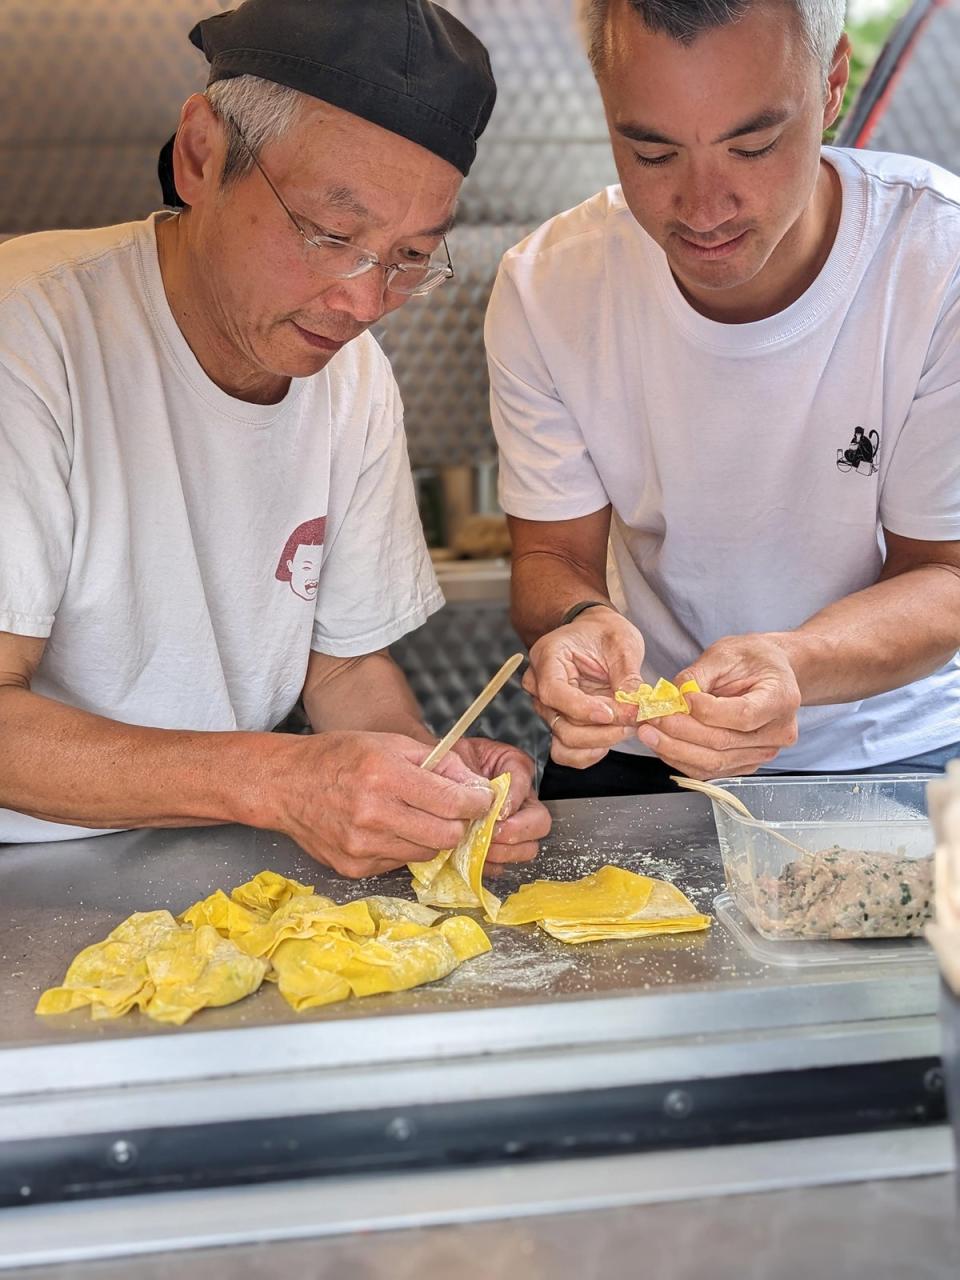 Yeung (R) and his father making wontons (Supplied)